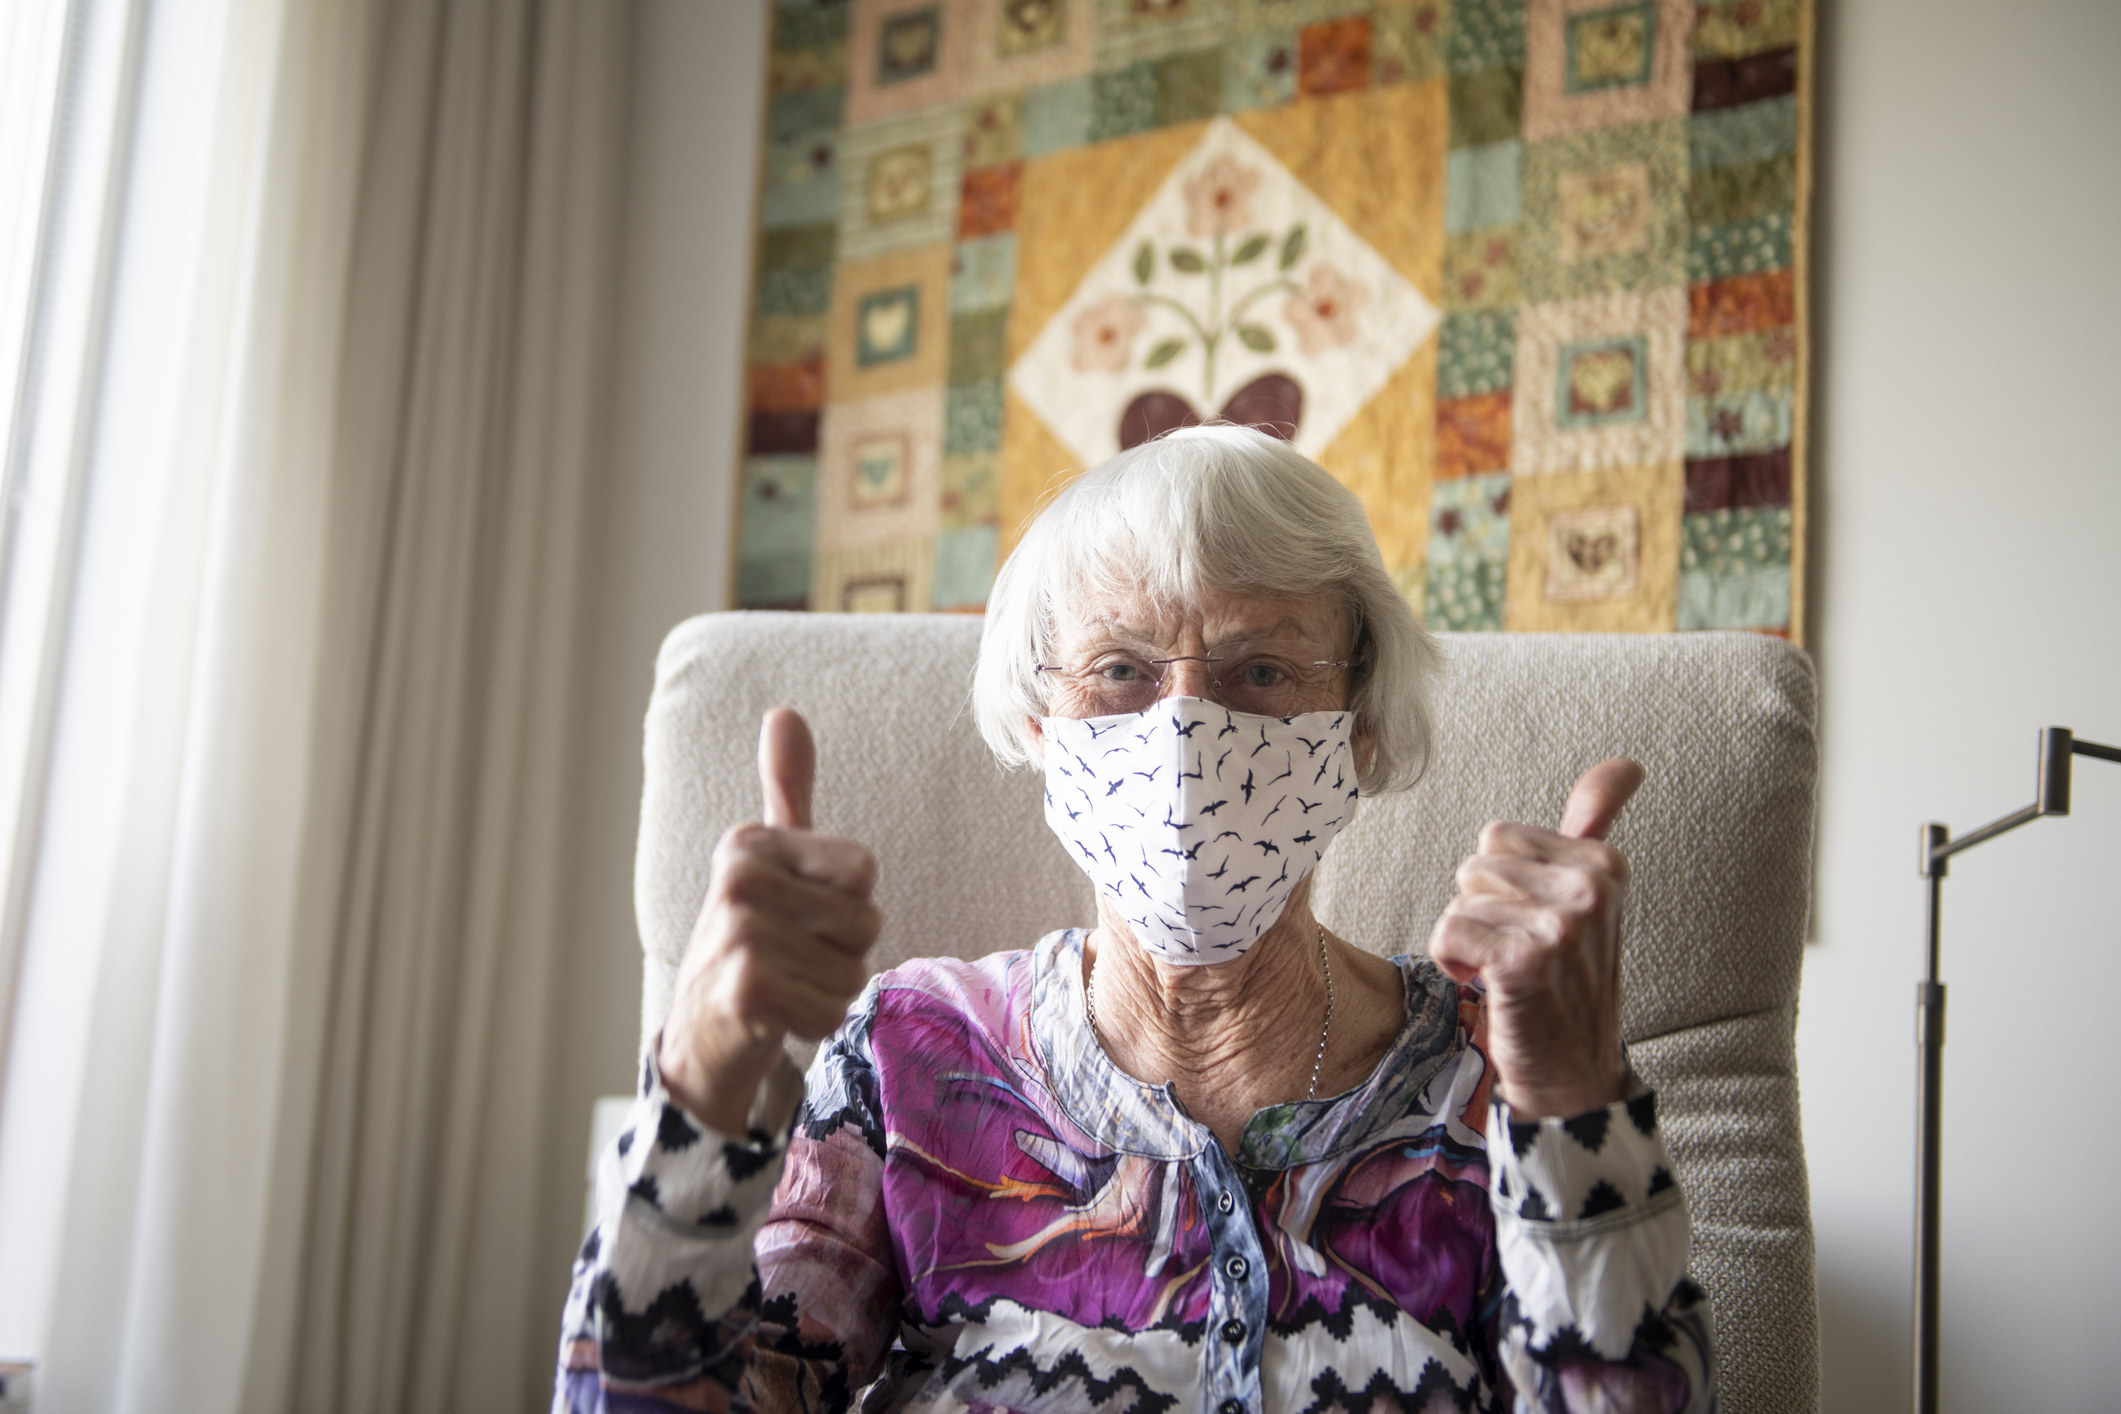 An older person giving the thumbs up while sitting in an armchair and wearing a mask